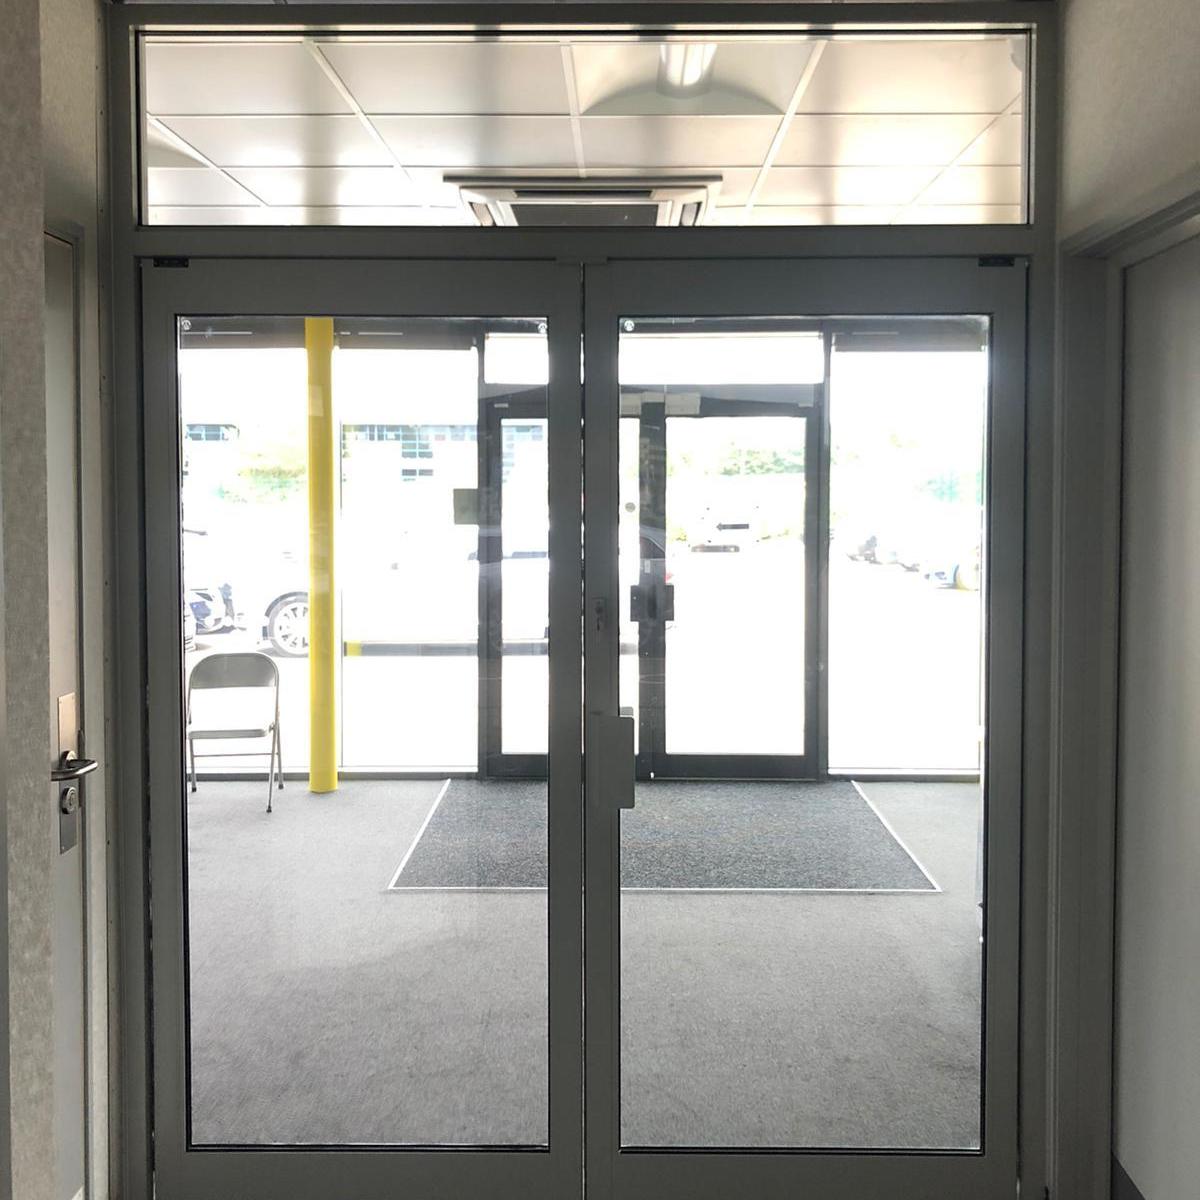 Double leaf, full vision Aluminium entrance doors as installed by Stanair Industrial Doors